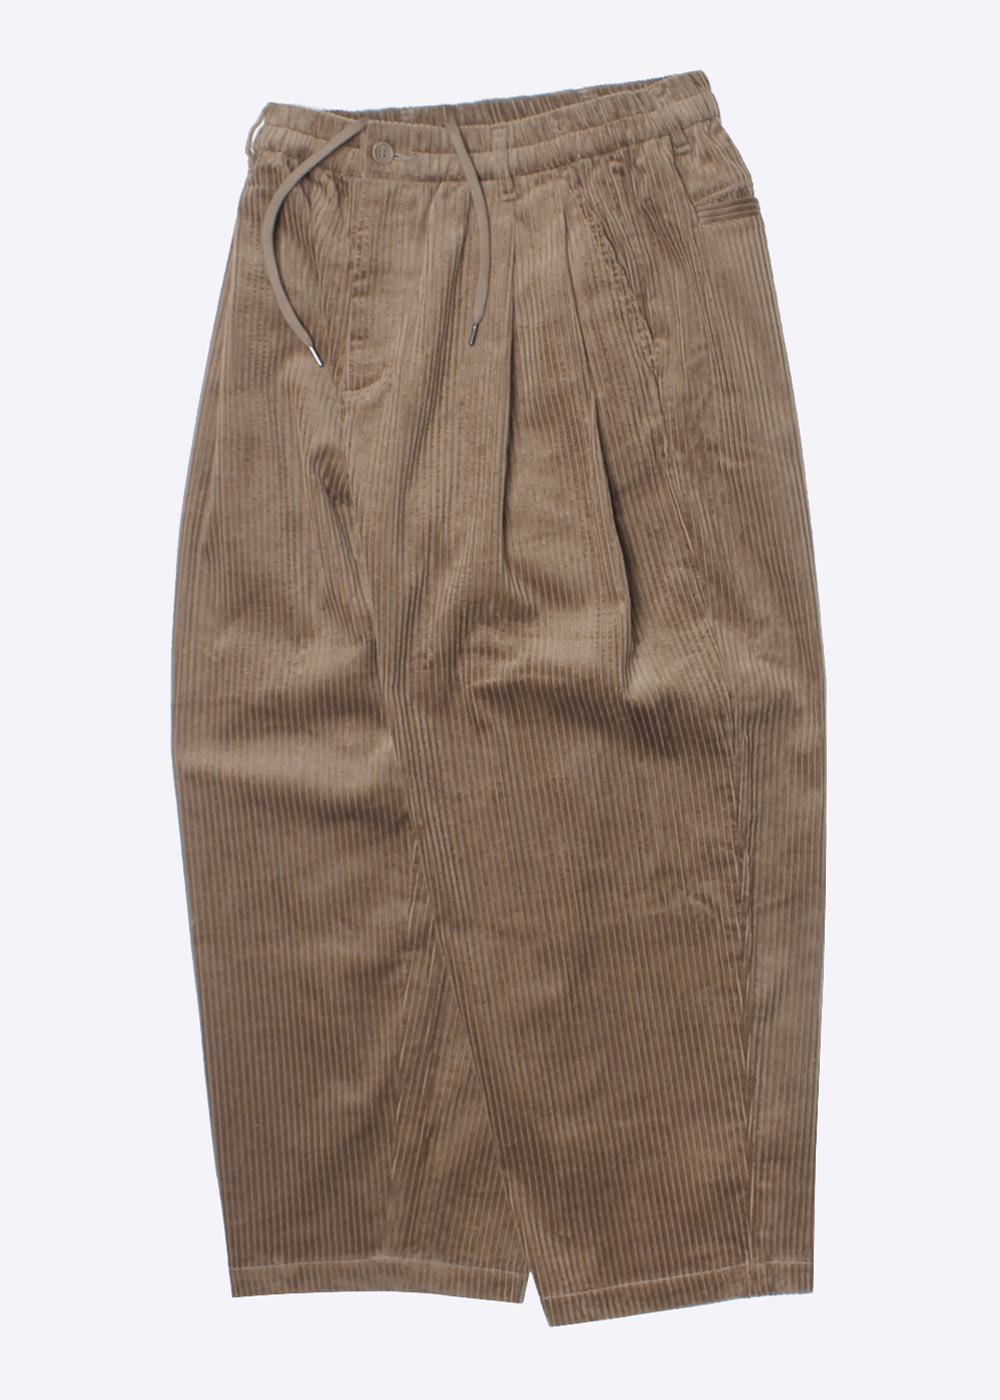 SENSE OF PLACE BY URBAN RESEARCH‘relexed fit’ corduroy pants